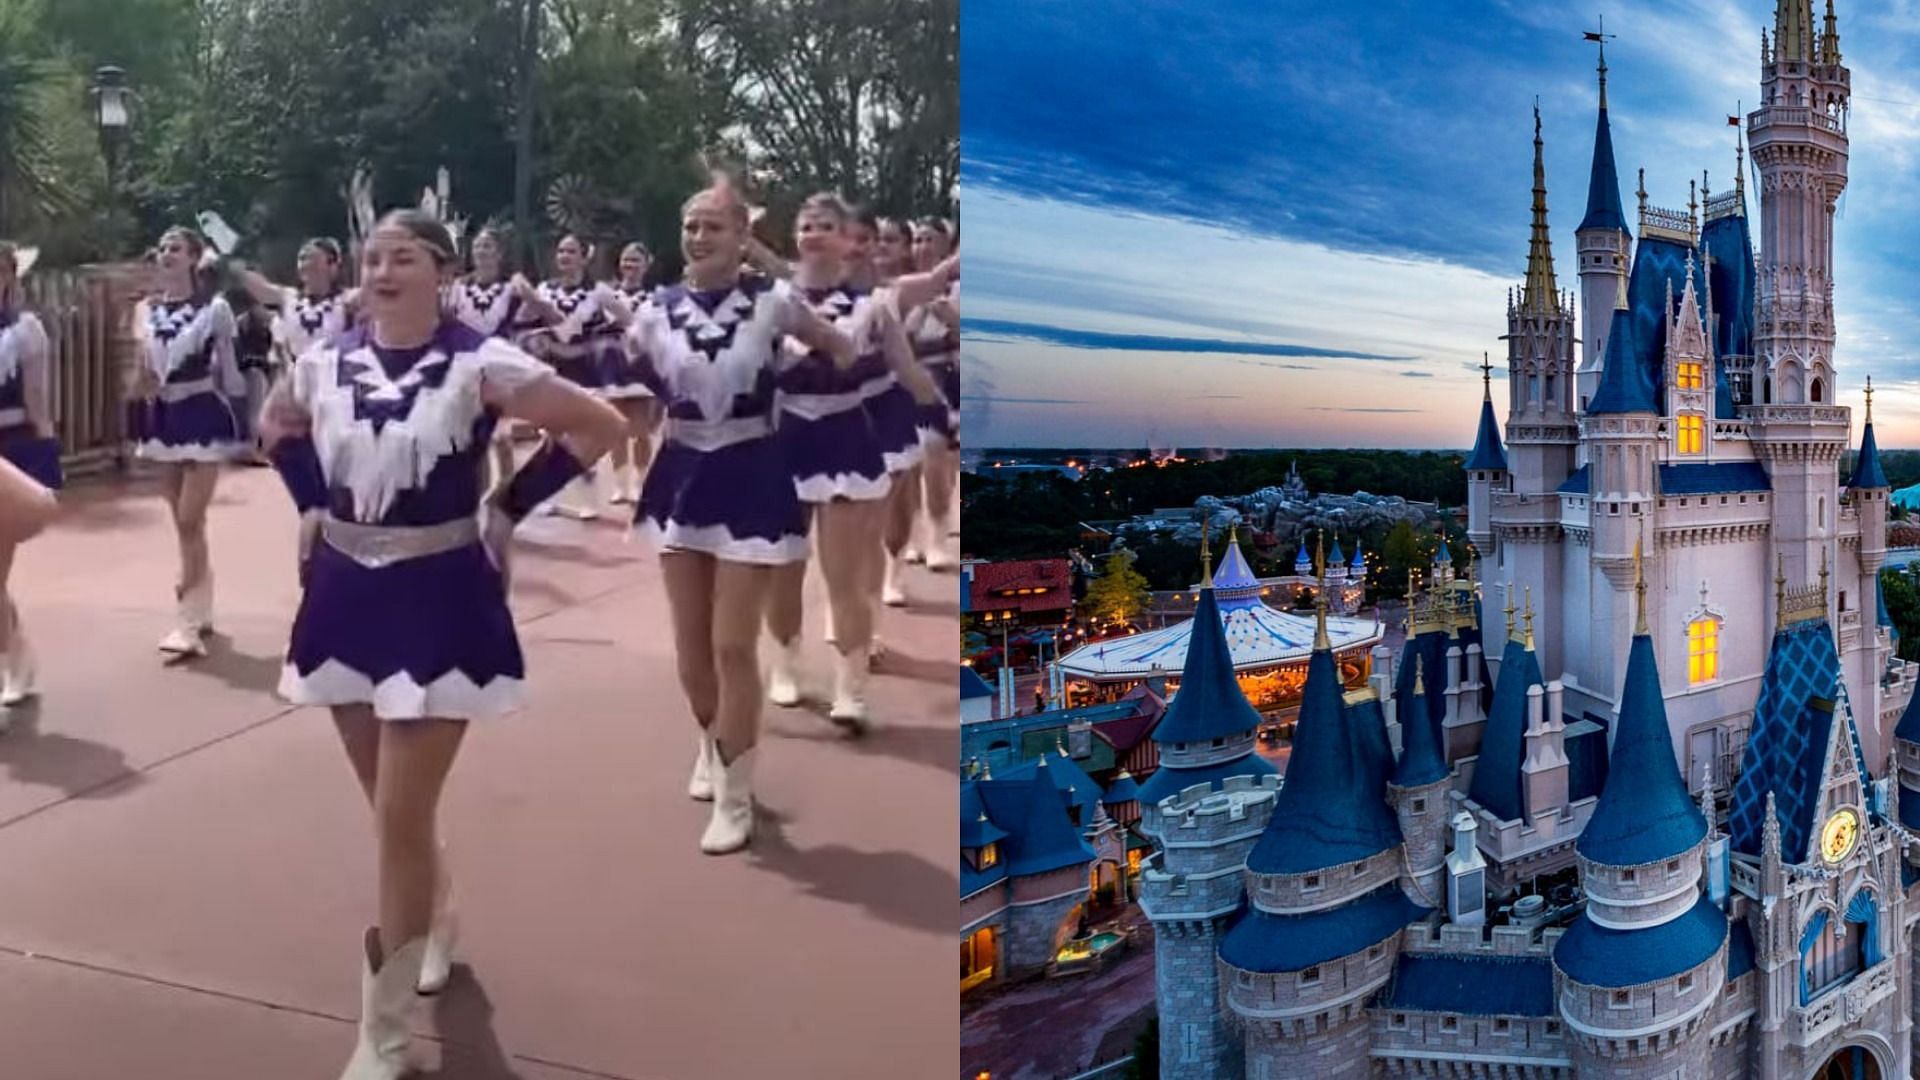 The Port Neches-Groves High School &ldquo;Indianettes&rdquo; drill team came under fire for a racially inappropriate performance at the Magic Kingdom (Image via NDN/YouTube and Matt Stroshane/Getty Images)